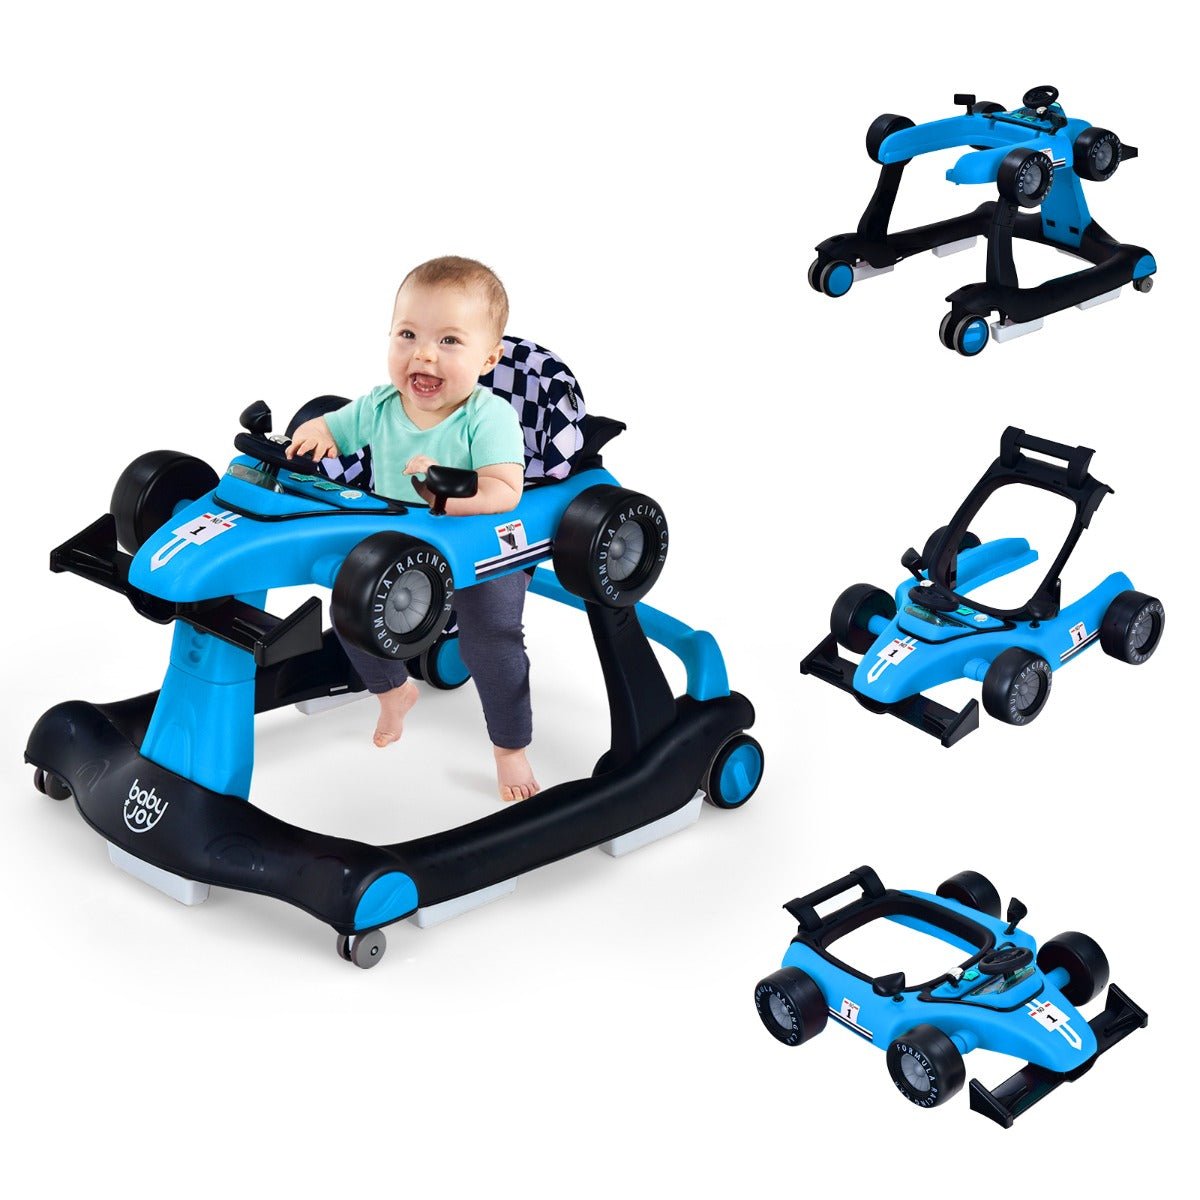 Multi-Functional Blue Activity Car Walker: 4-in-1 Design with Adjustable Height and Speed